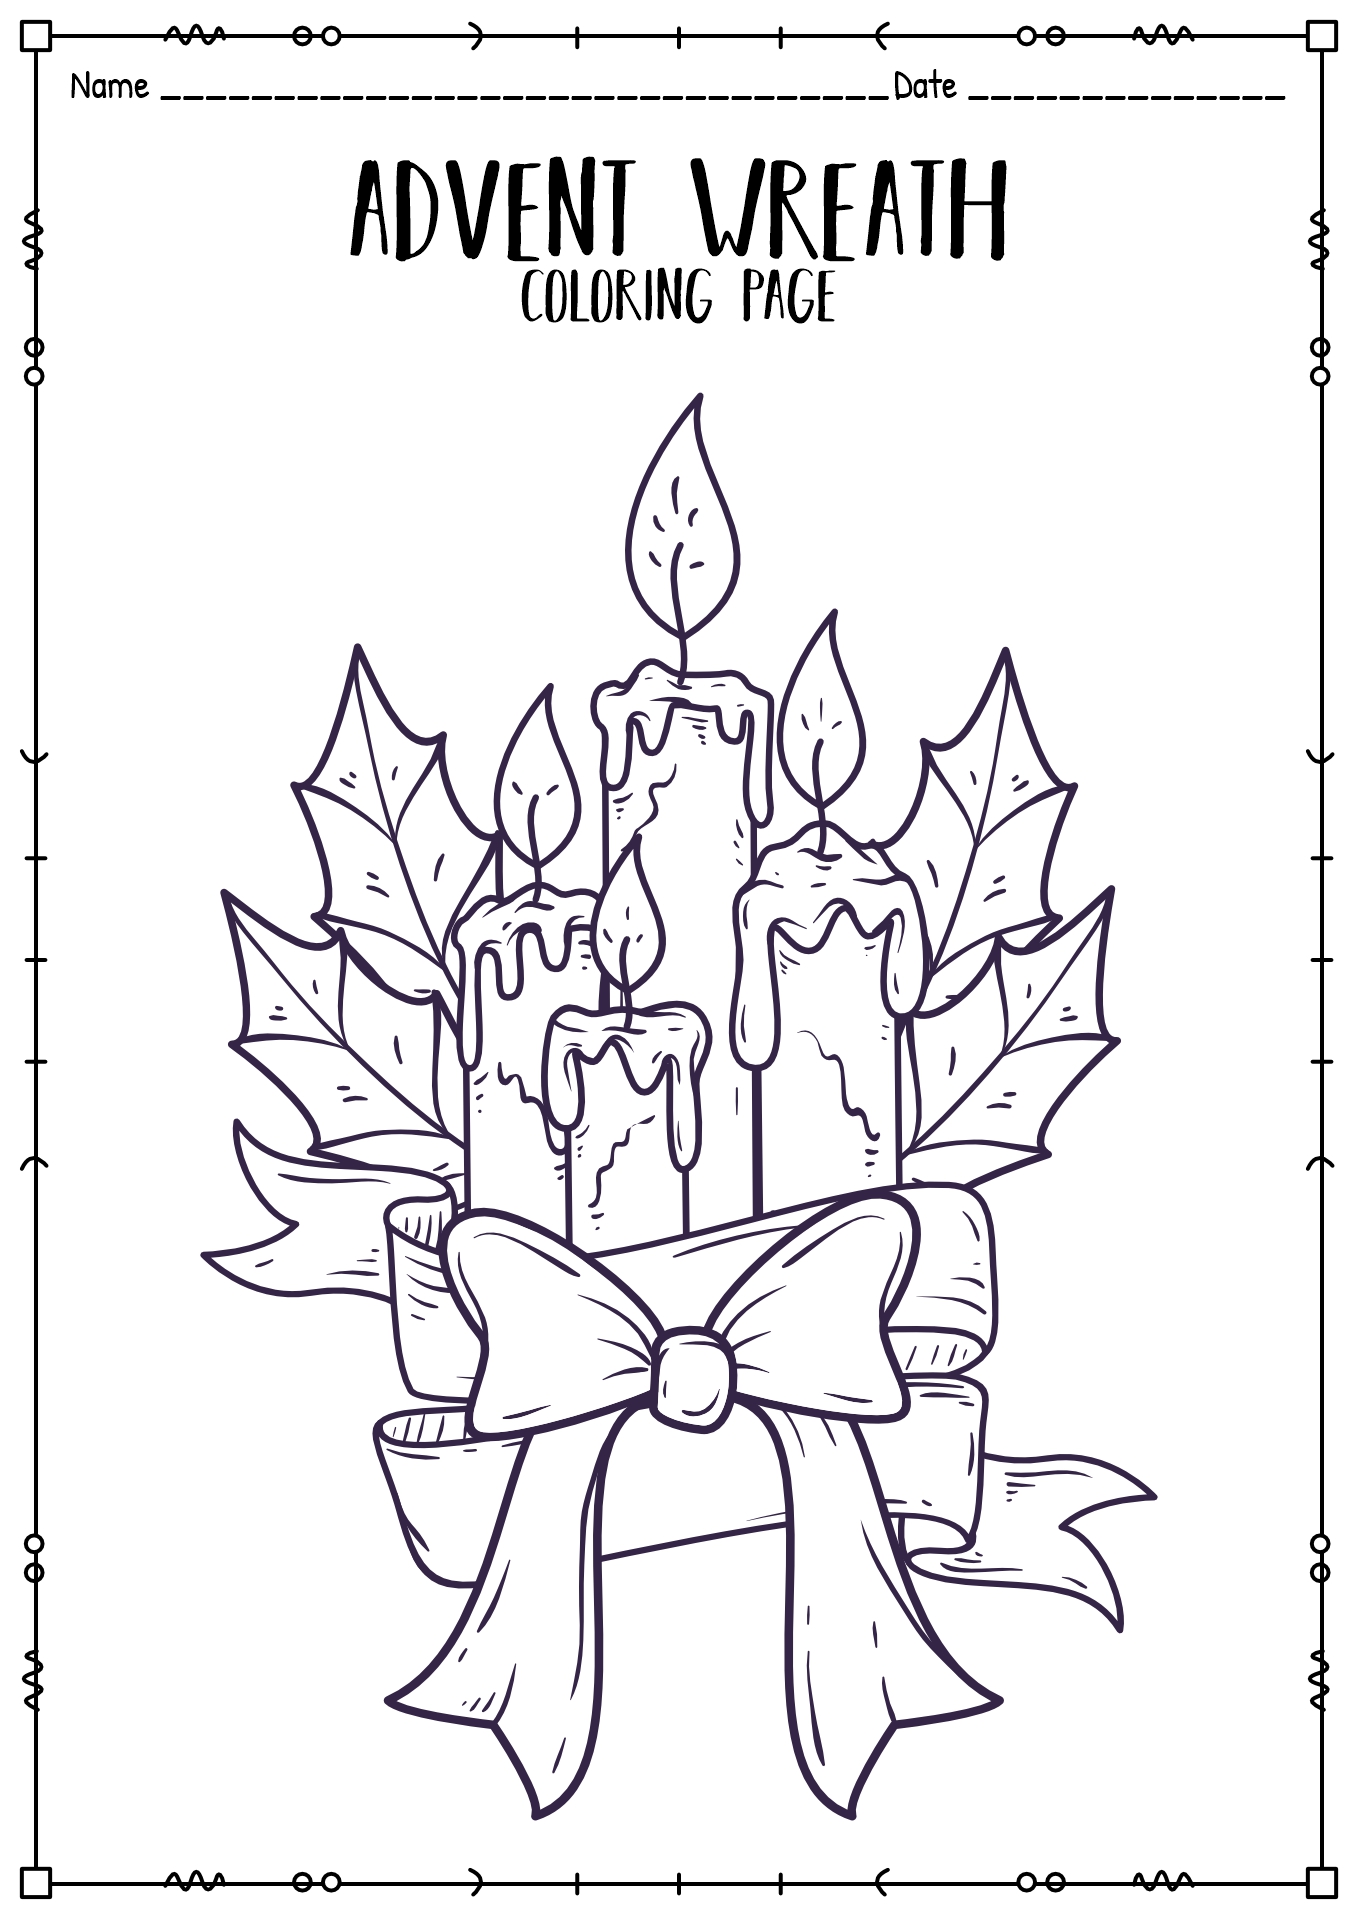 Candle Advent Wreath Coloring Page